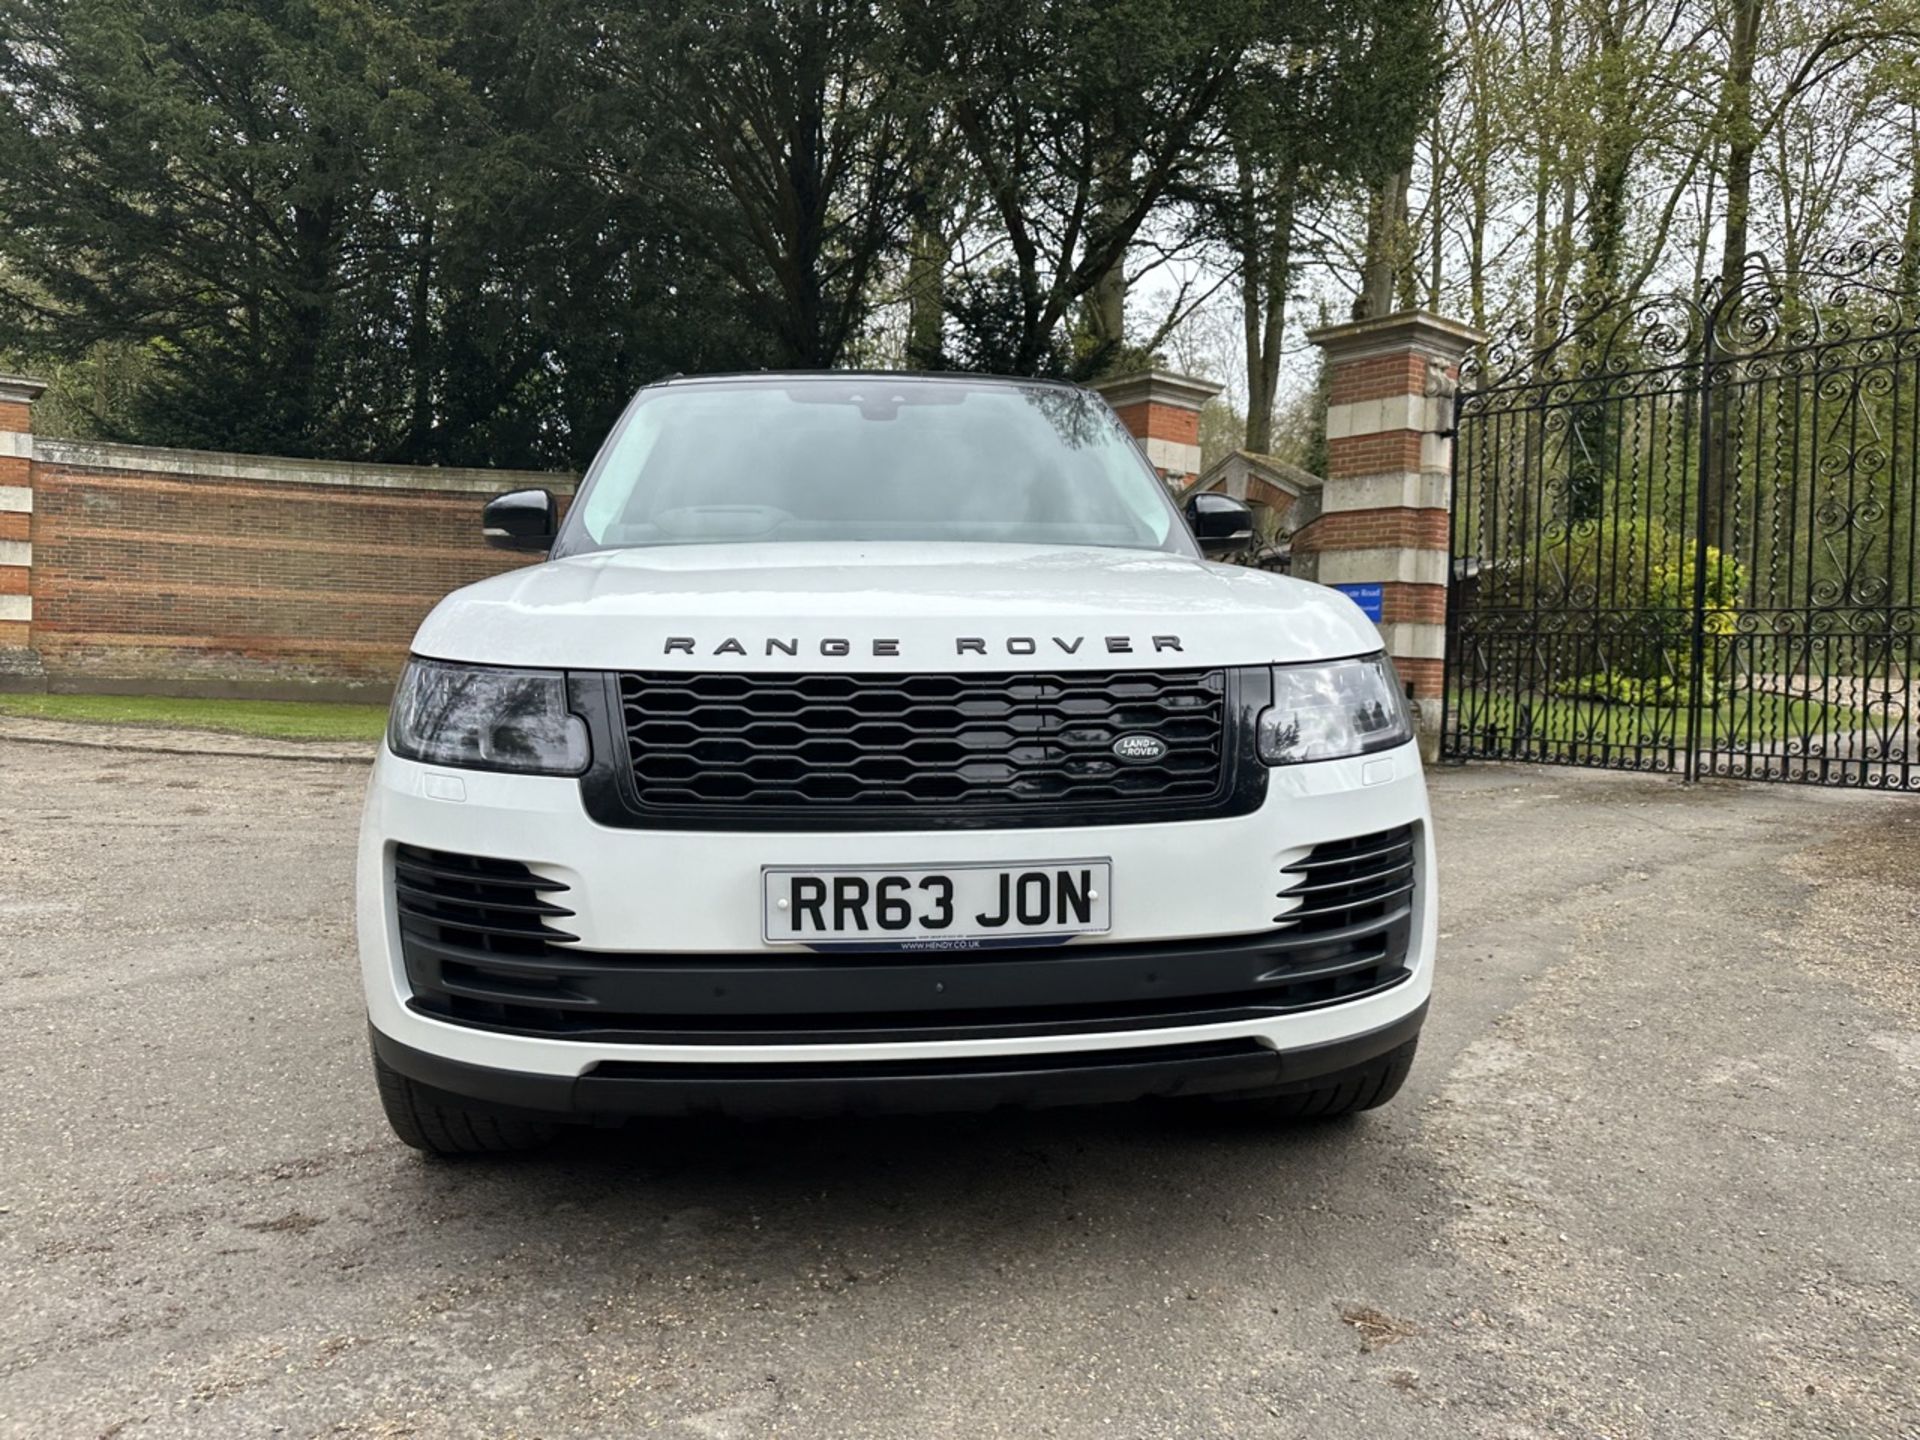 LAND ROVER RANGE ROVER 2.0 P400e Autobiography 4dr Auto - Automatic - 2018 - 31k miles - FULL SH - Image 2 of 17